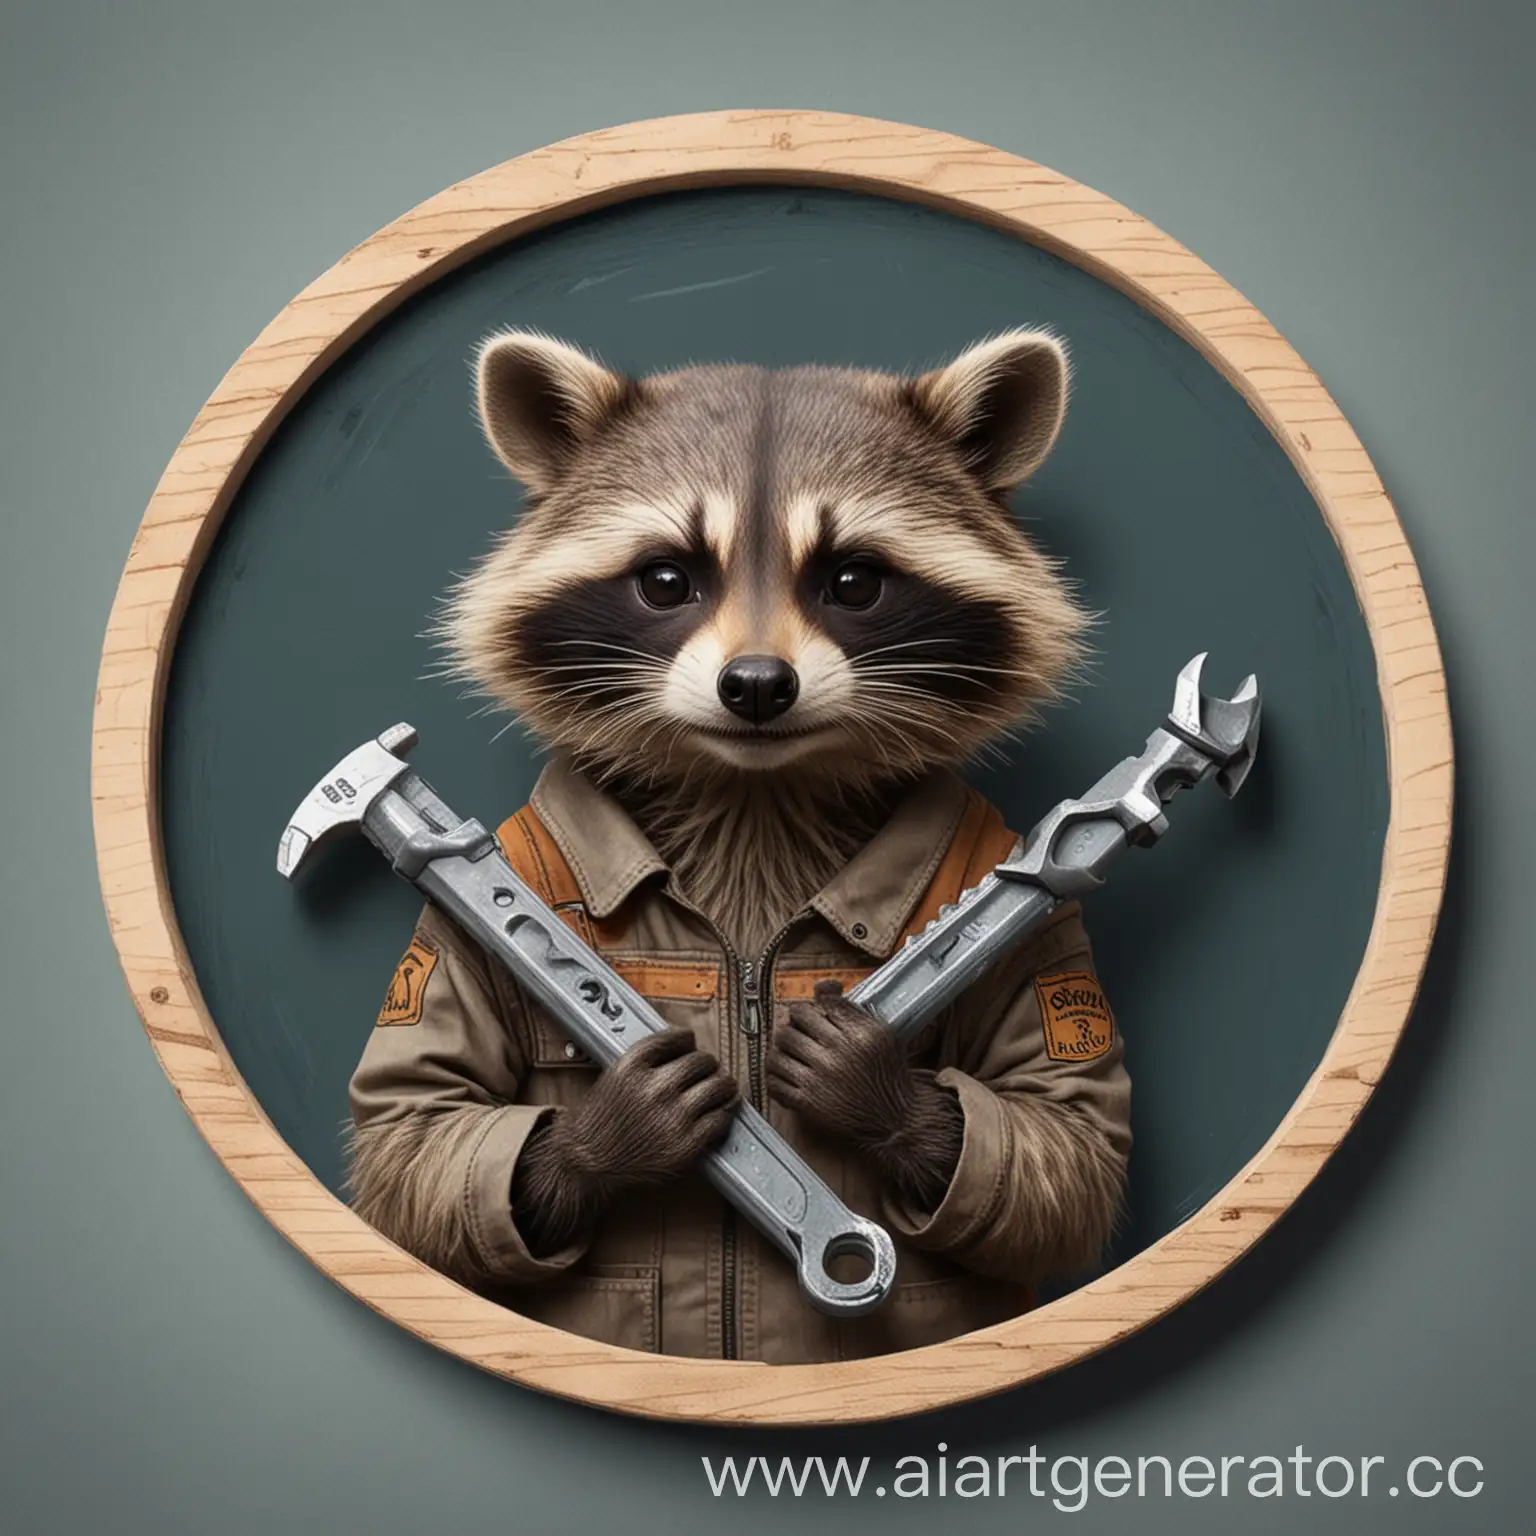 Sad-Raccoon-with-Adjustable-Wrench-Fix-and-Ride